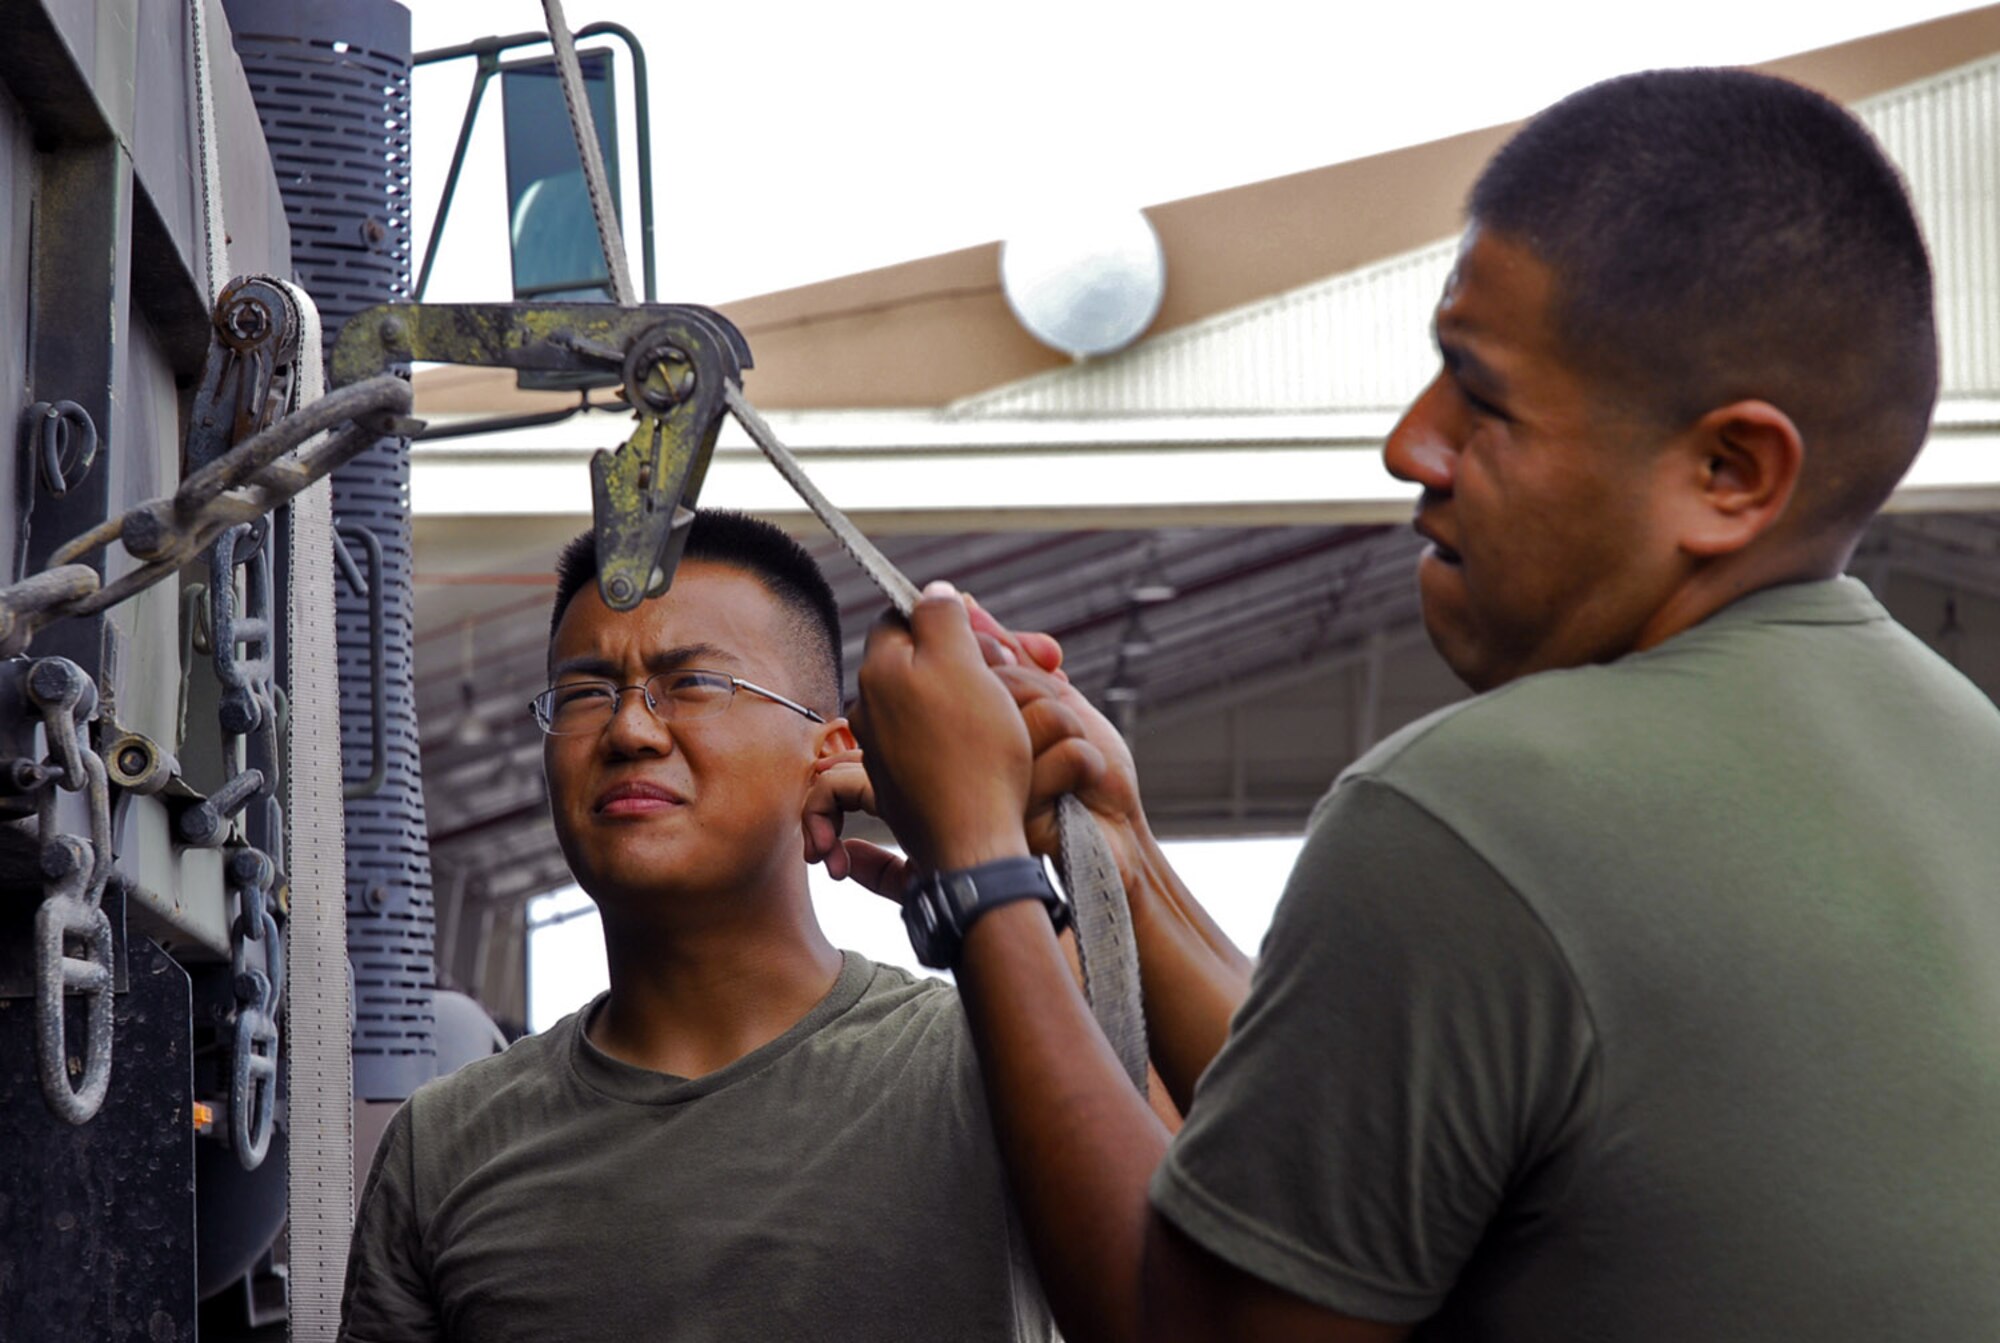 Marine Lance Cpl. Saysavanh Mainvong (left) watches as Marine Cpl. Samuel Kee secures containers onto a truck before relocating them to a secure building in preparation for Typhoon Man-Yi July 12 at Kadena Air Base, Japan. The typhoon is the first of the year for Okinawa and is expected to make landfall July 13. The corporals are assigned to Marine Wing Liaison Kadena. (U.S. Air Force photo/Airman 1st Class Sheila deVera) 
